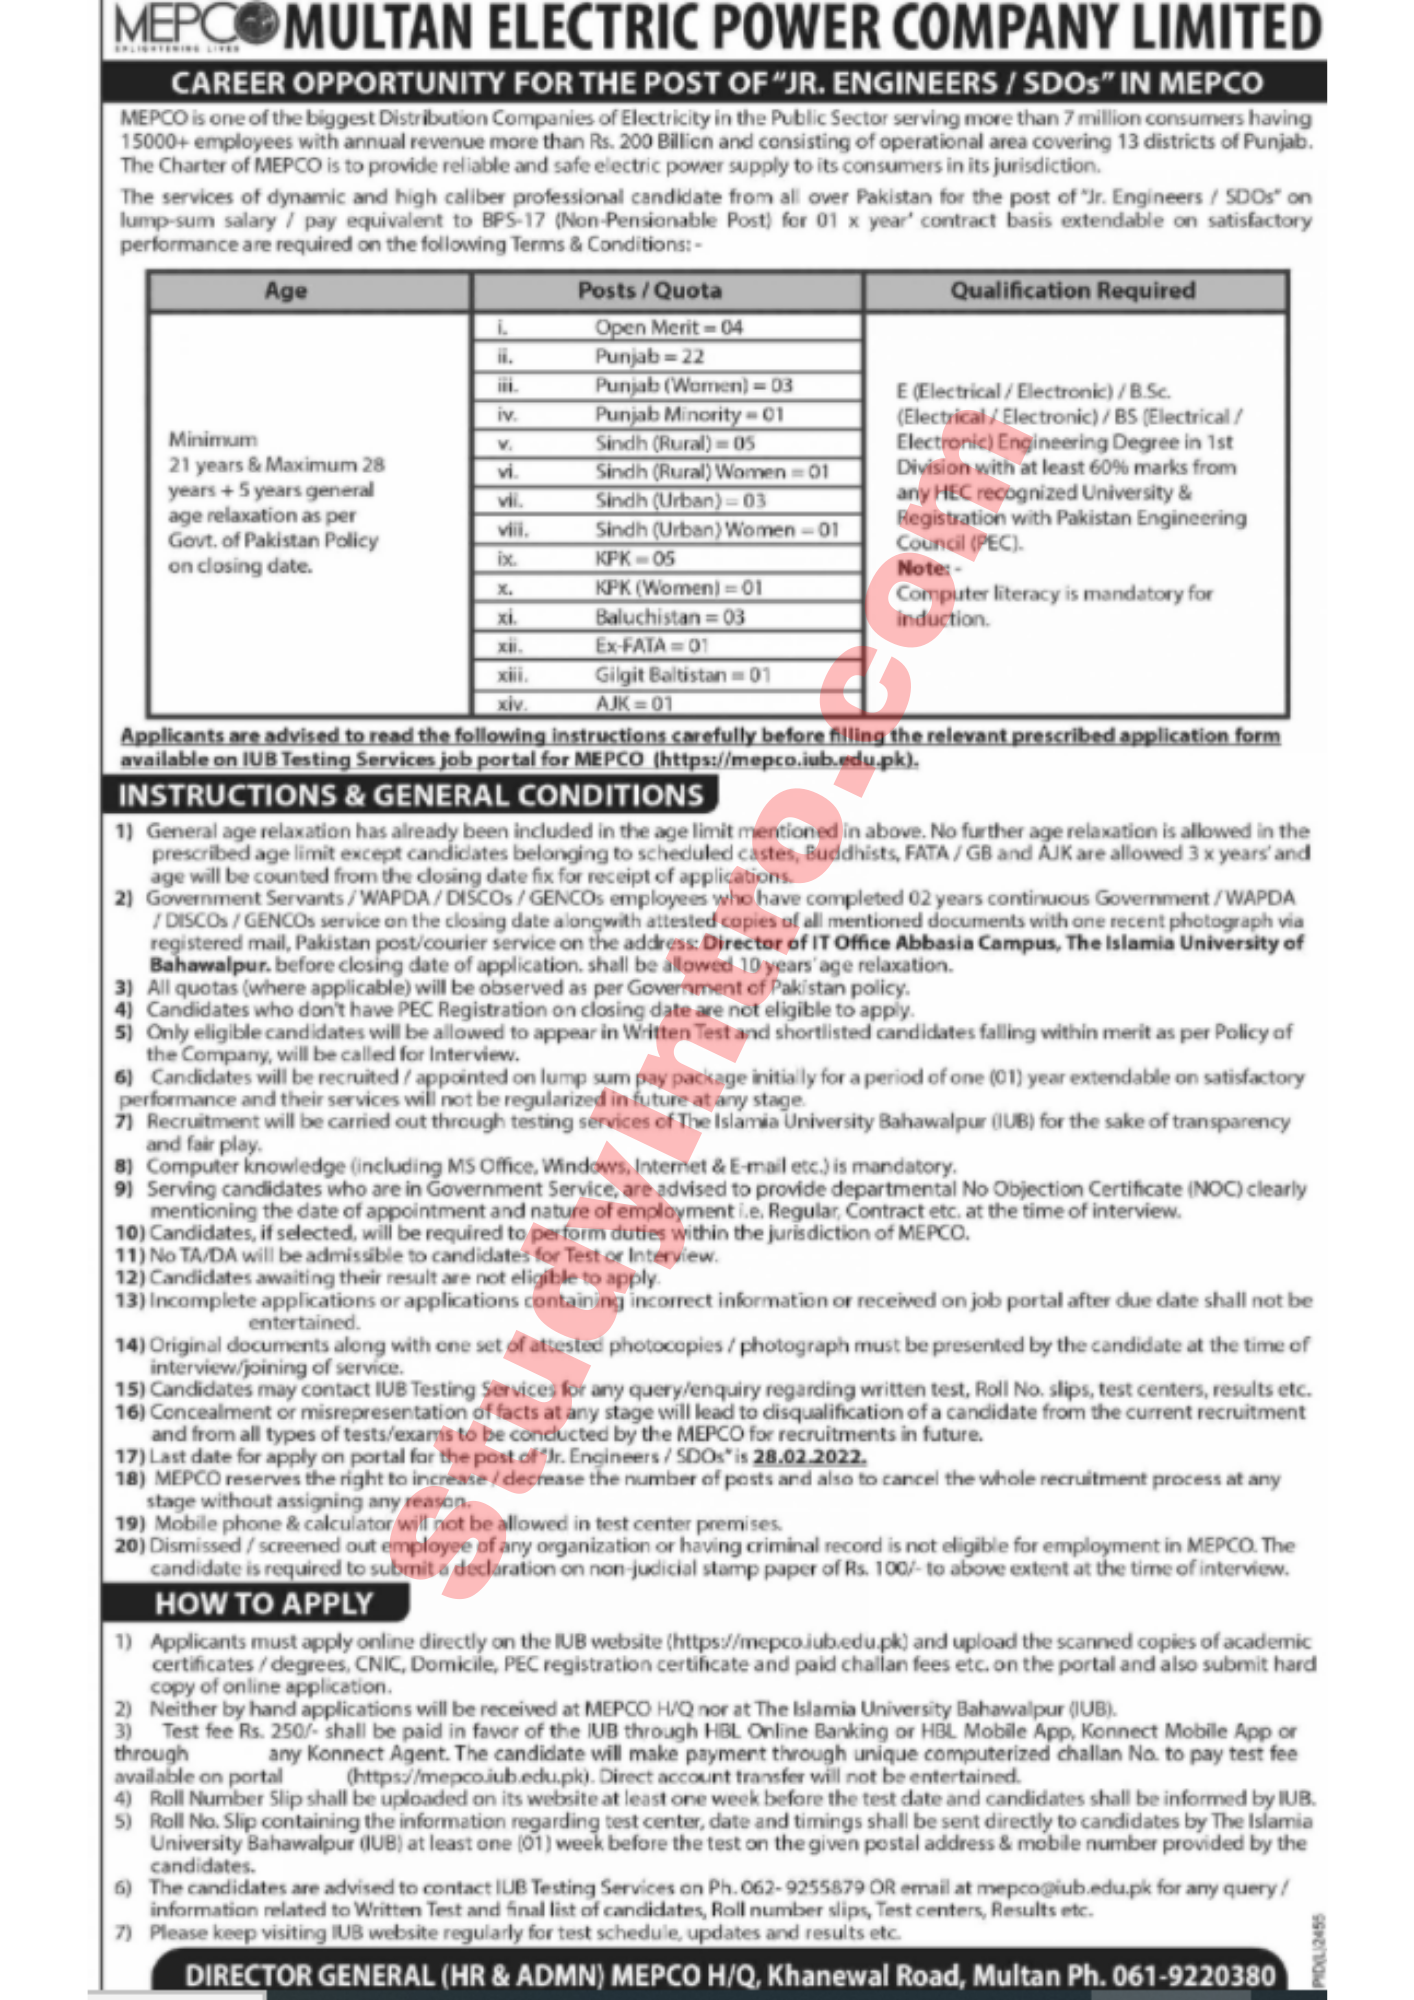 Latest Jobs in Multan Electric Power Company limited 2022